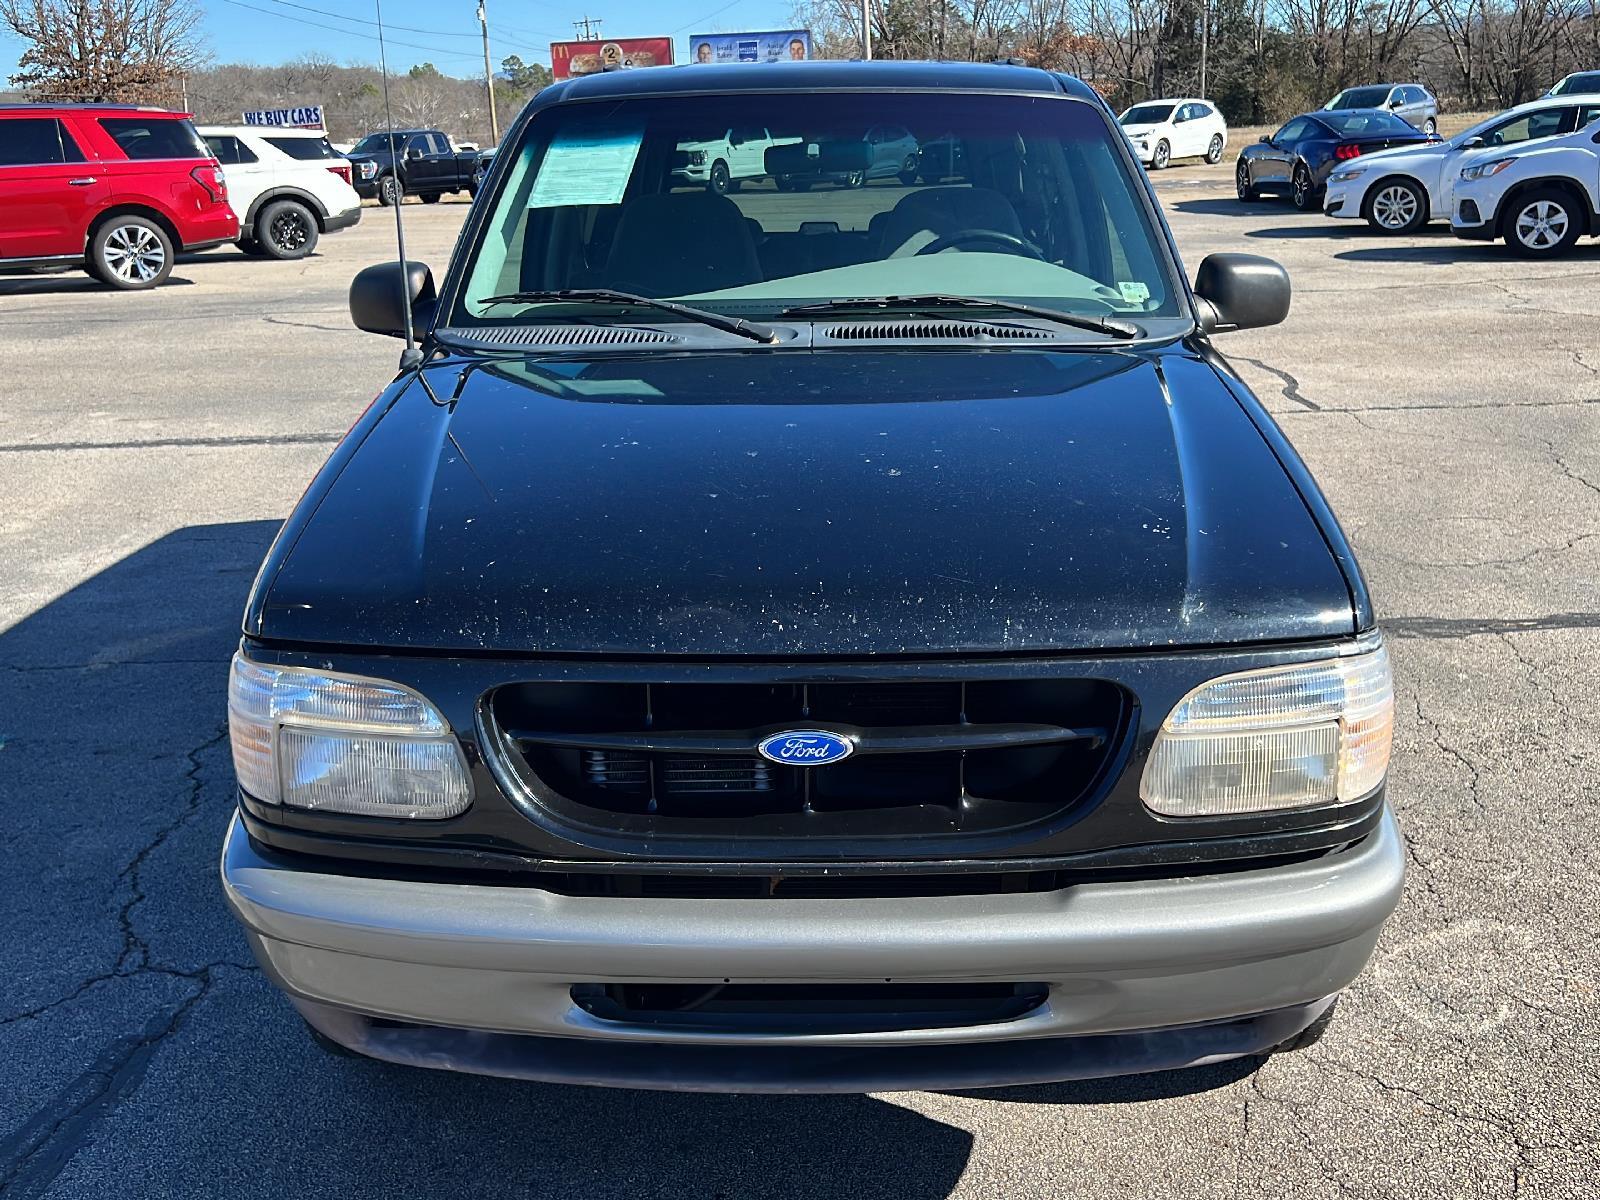 Used 1997 Ford Explorer Sport SPORT with VIN 1FMCU22E7VUD08199 for sale in Booneville, AR